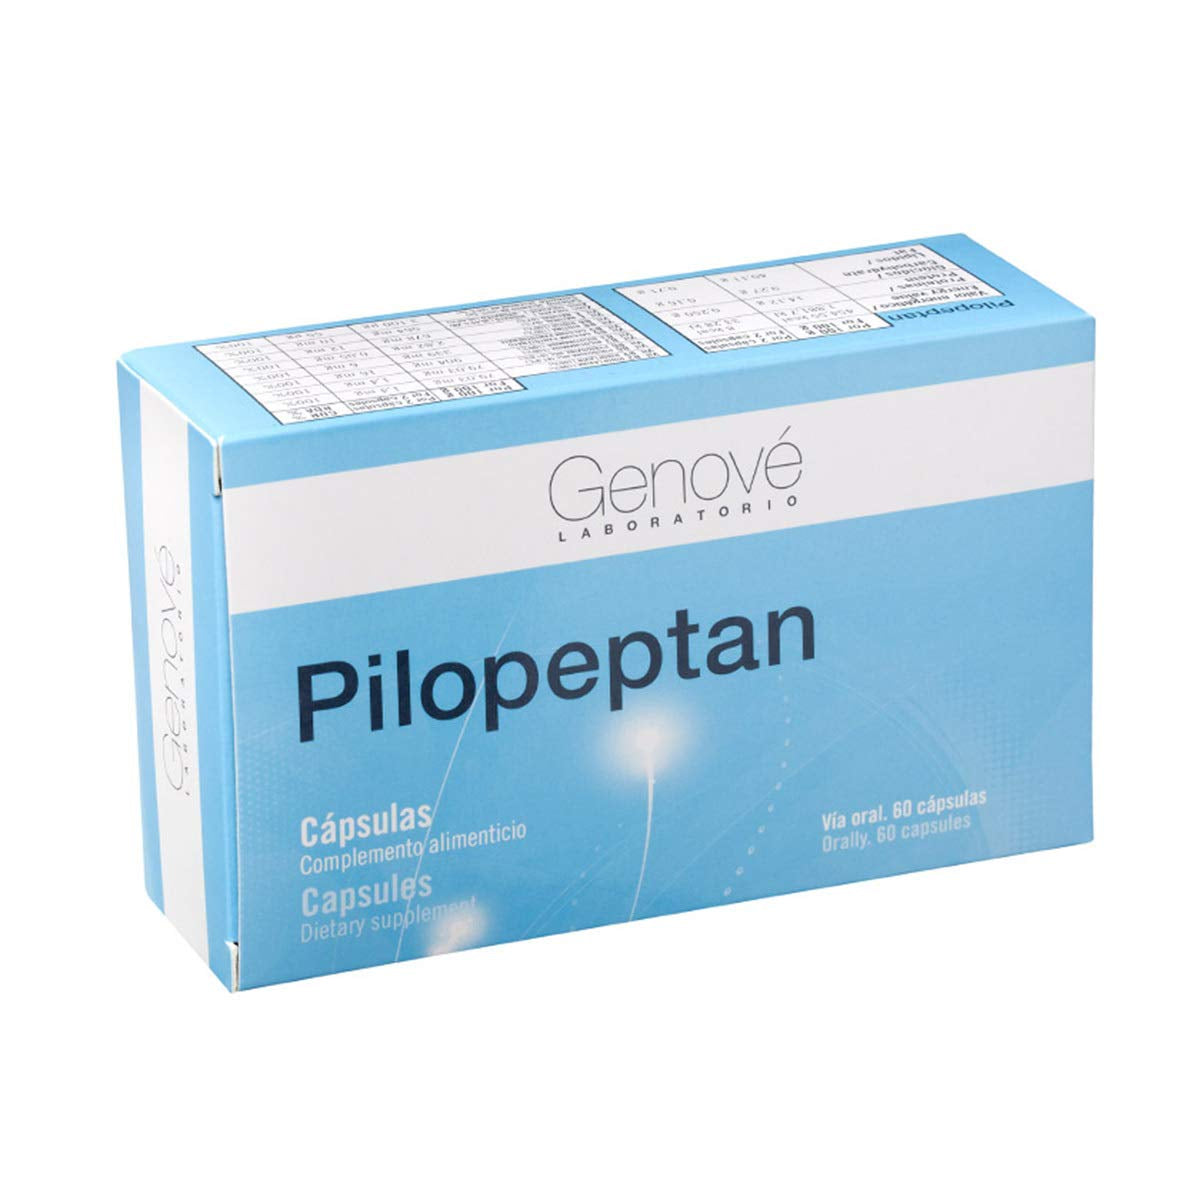 Pilopeptan 60 Capsules - Hair Care - Treatment to Stop Hair Loss - Hair Regrowth Treatment for Women and Men - Vitamins - Provide Nutrients to Your Hair to Stop Hair Loss - Active Ingredients